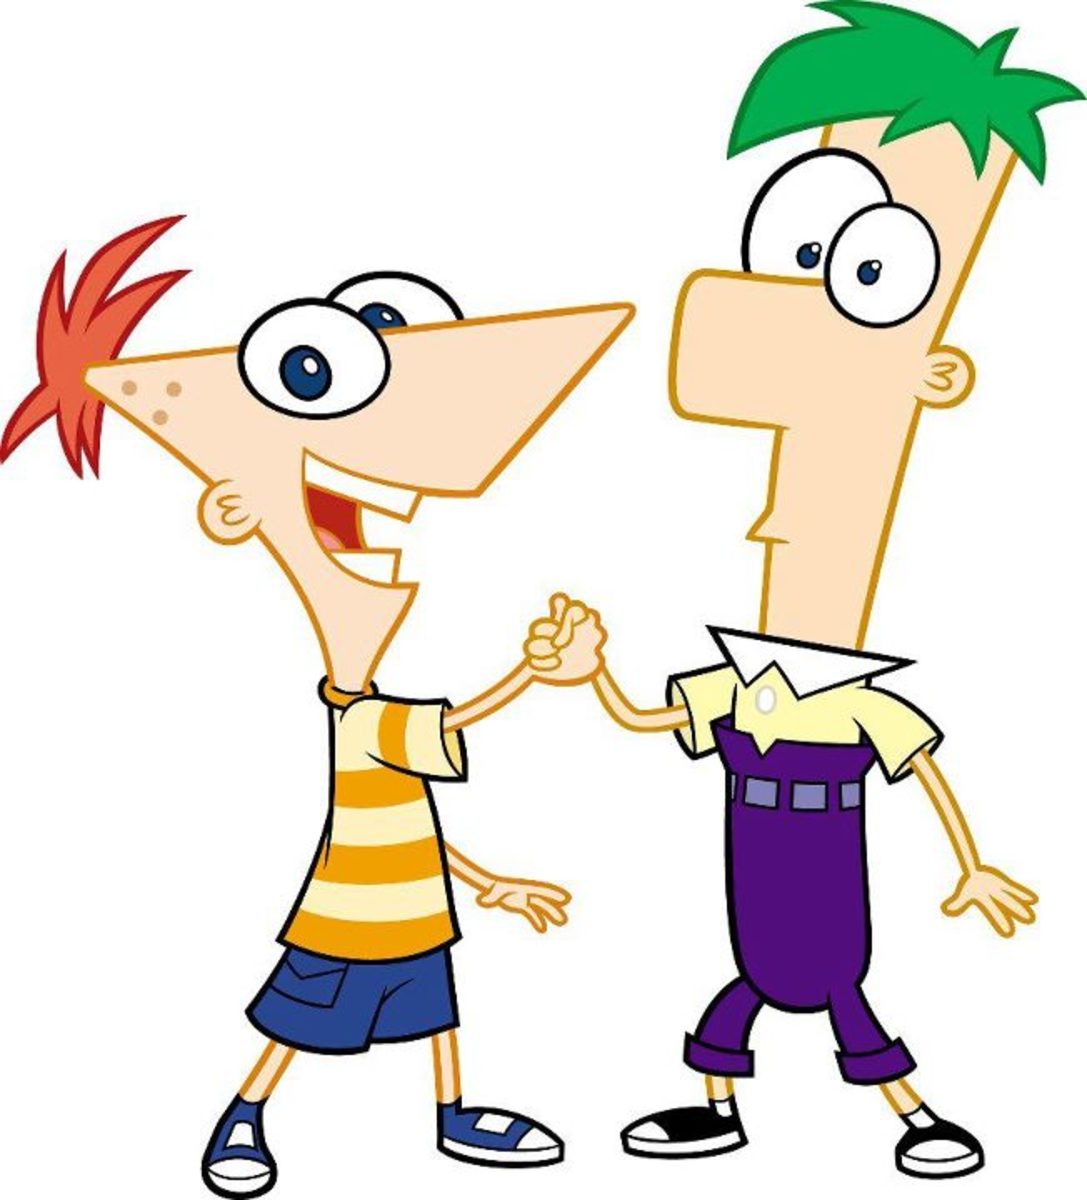 How to Draw Phineas and Ferb